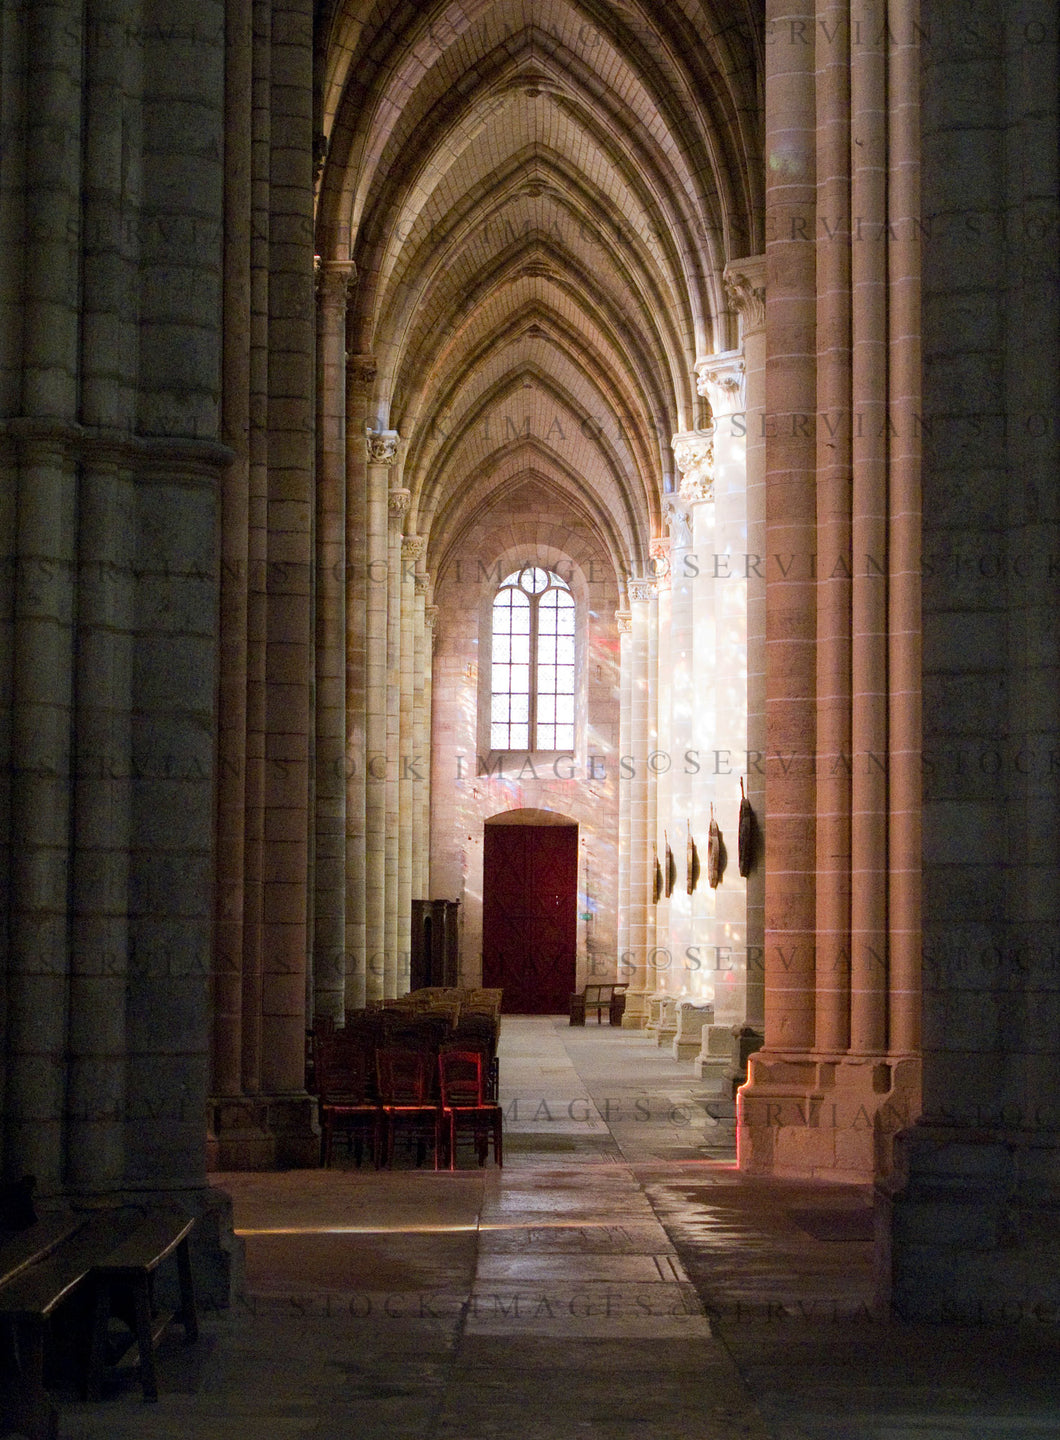 Historical building - cathedral interior, France (Nick 7017)